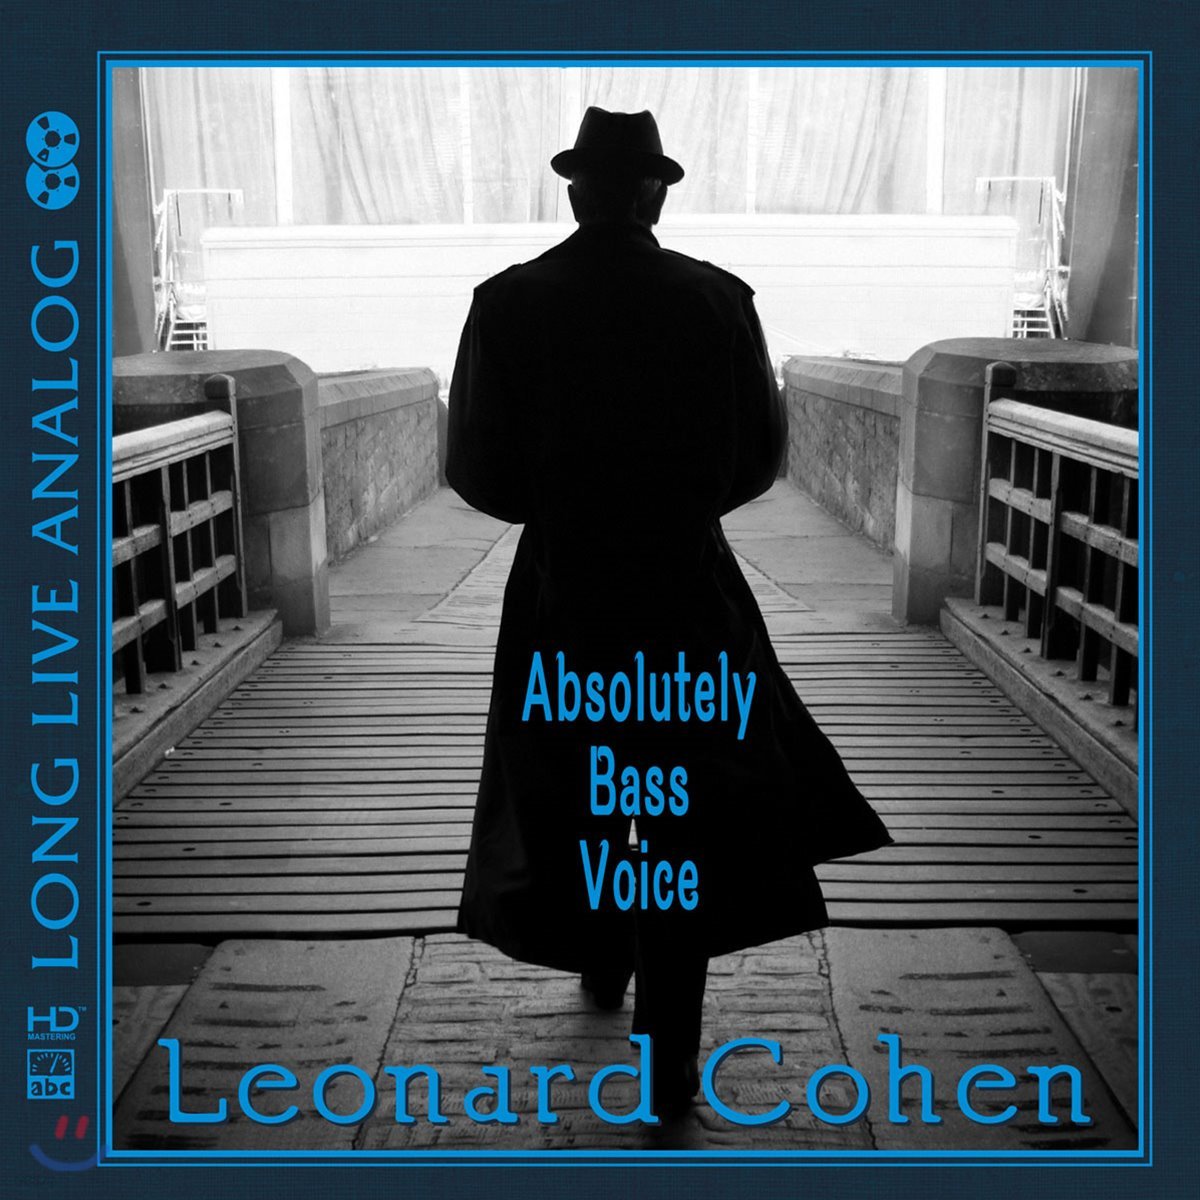 Leonard Cohen (레너드 코헨) - Absolutely Bass Voice (Silver Alloy Limited Edition)